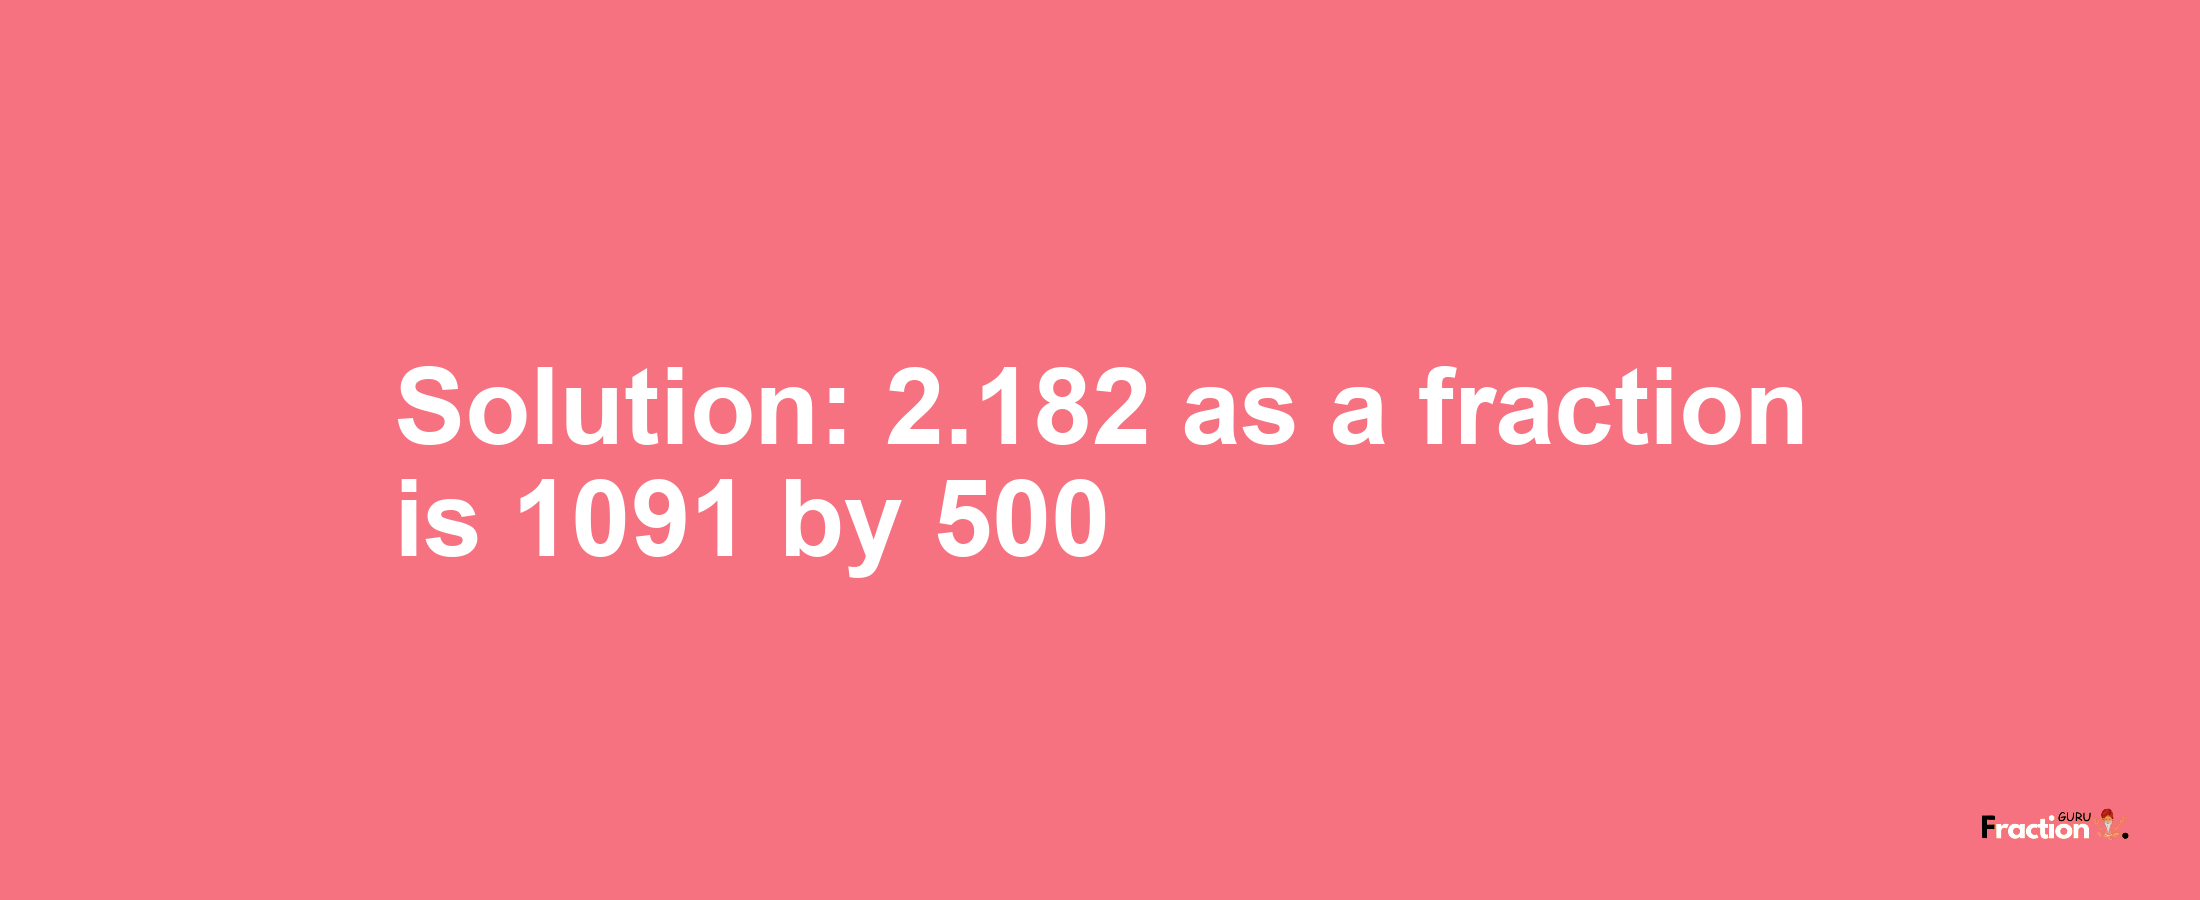 Solution:2.182 as a fraction is 1091/500